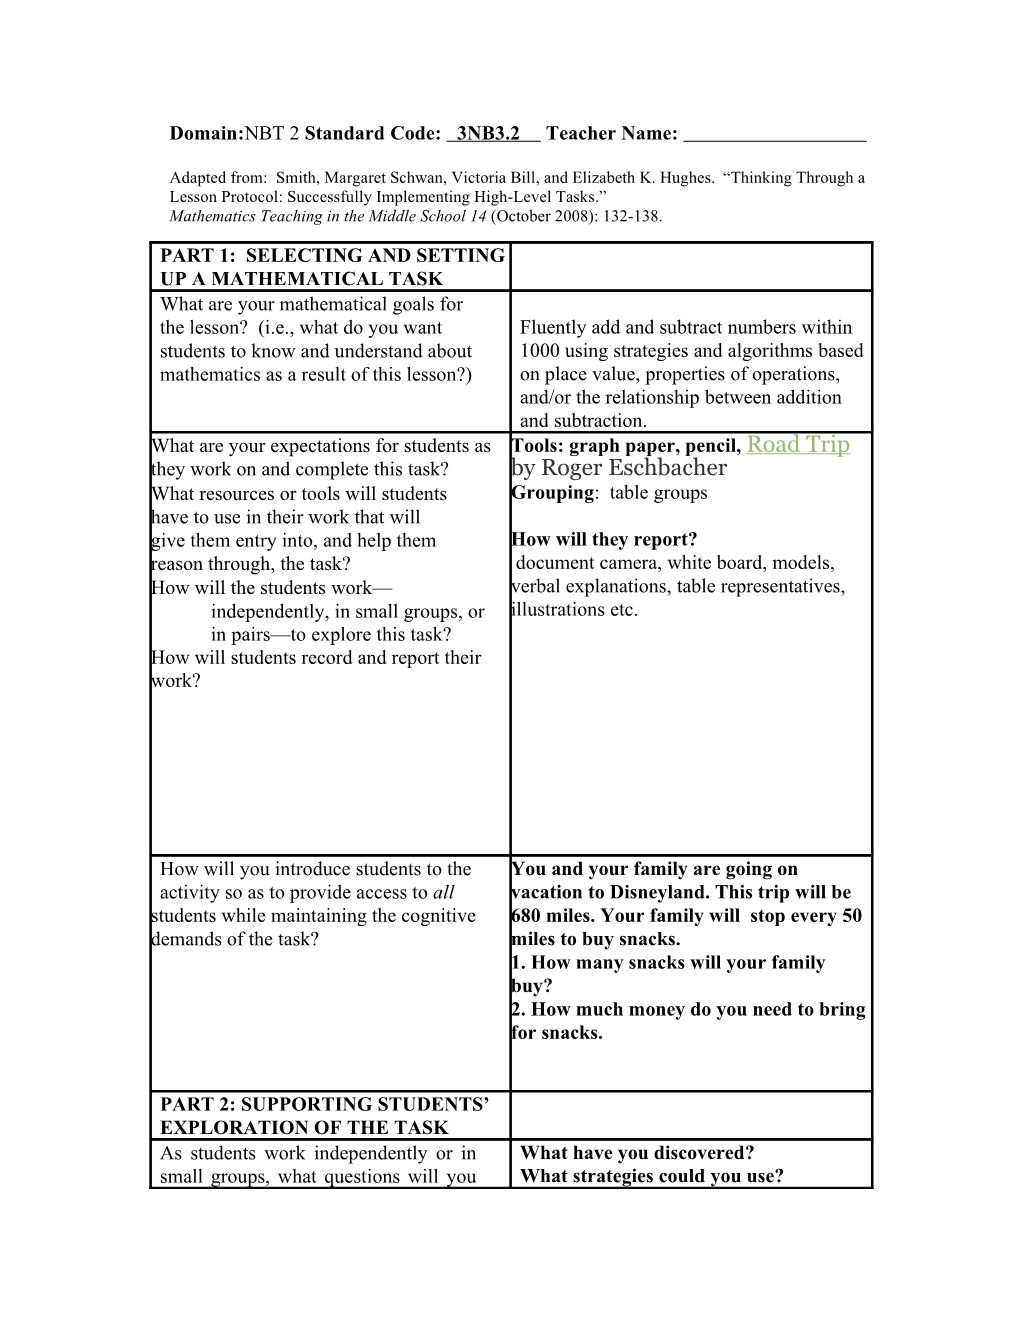 Thinking Through a Lesson Protocol (TTLP) Template s32